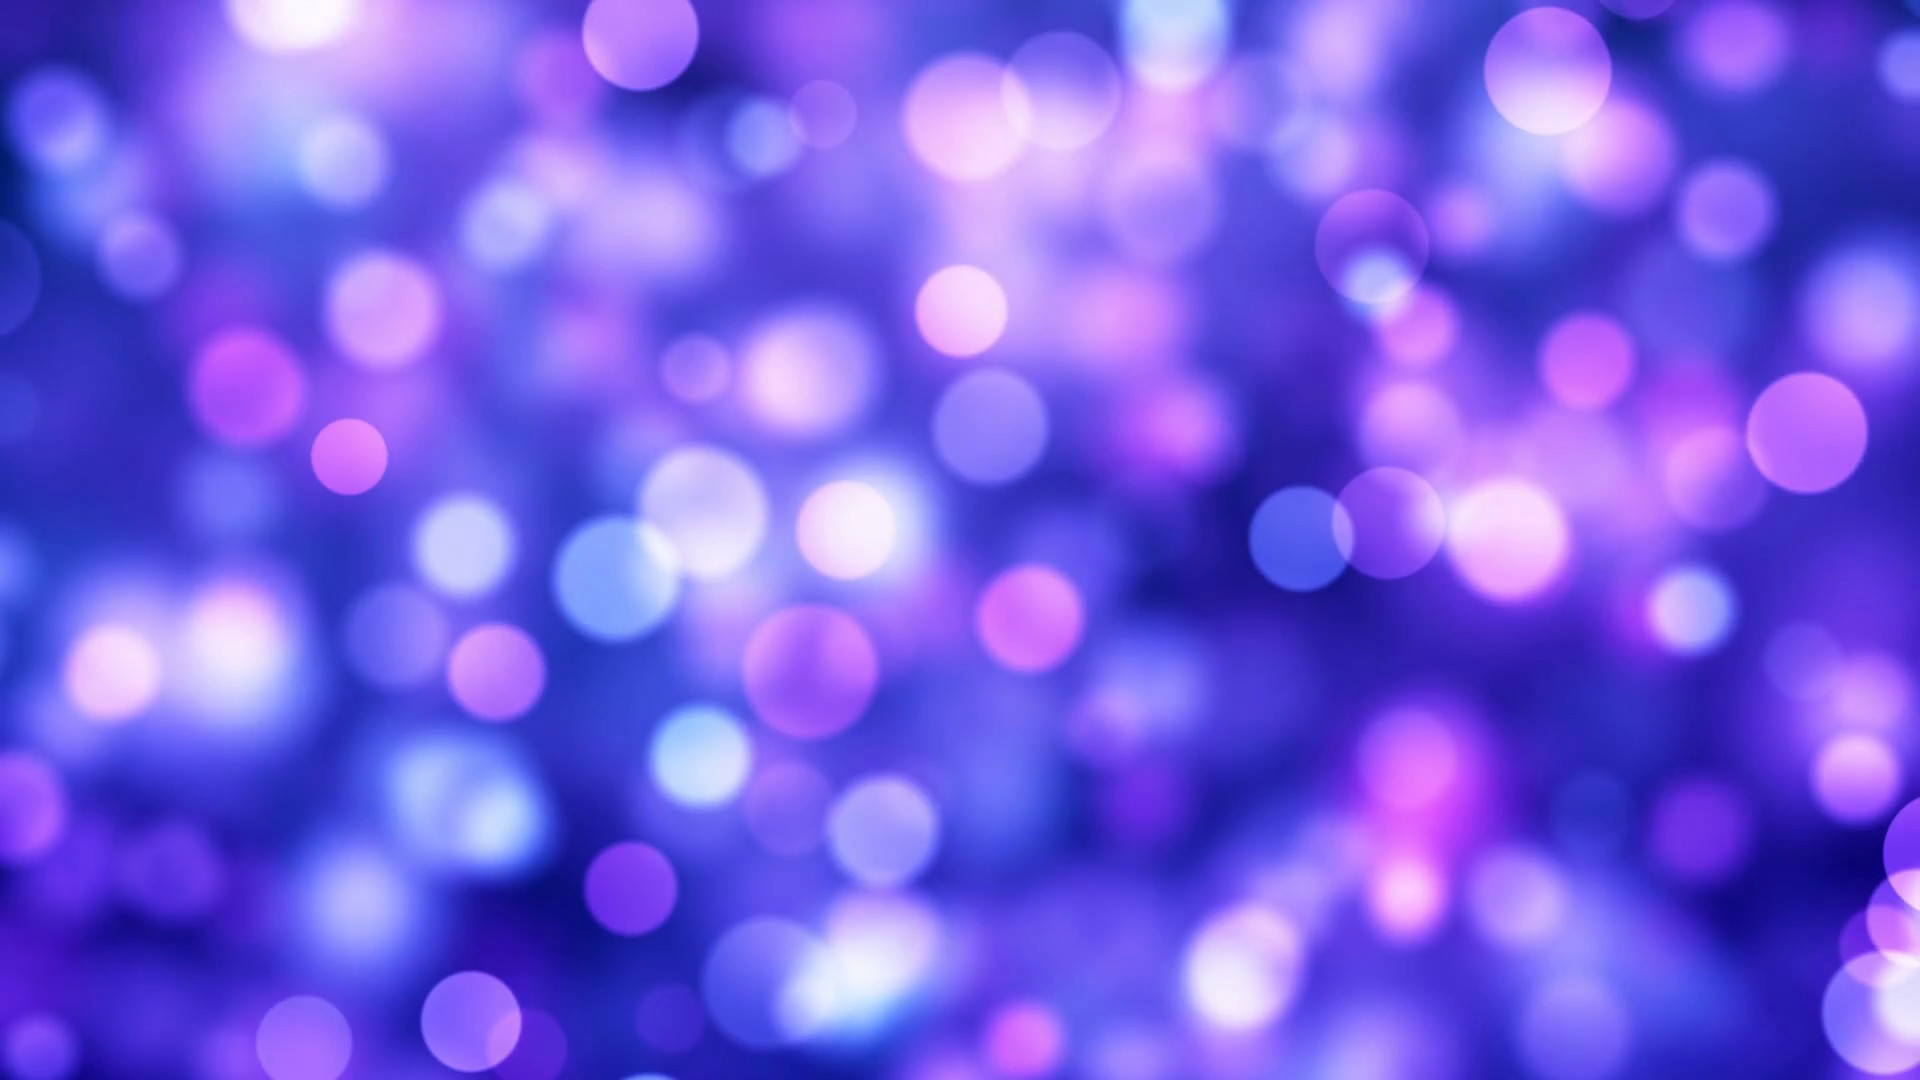 1920x1080 HD Loopable Background with nice purple bokeh Stock Video Footage -  VideoBlocks